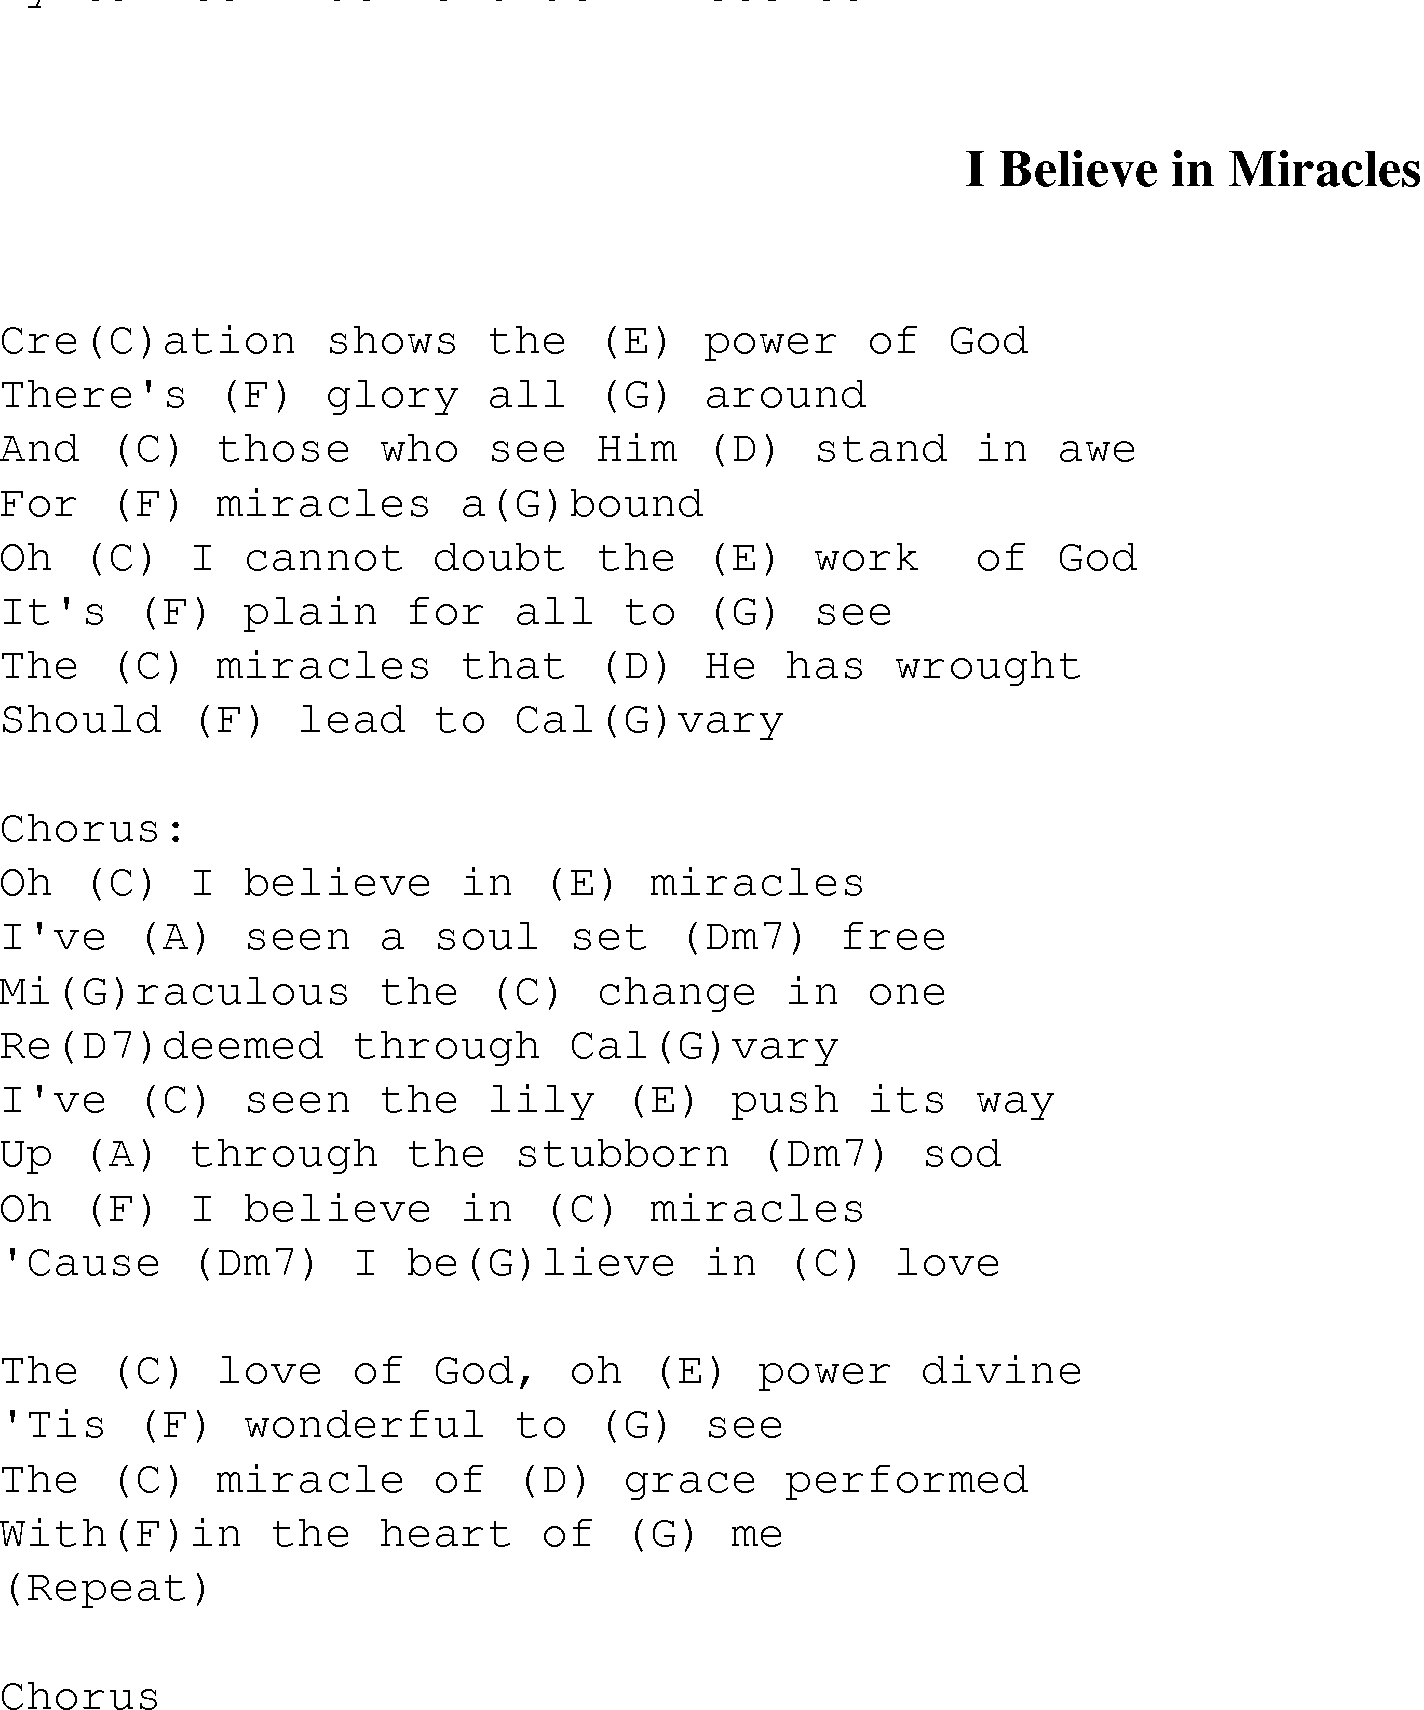 Gospel Song: i_believe_in_miracles, lyrics and chords.